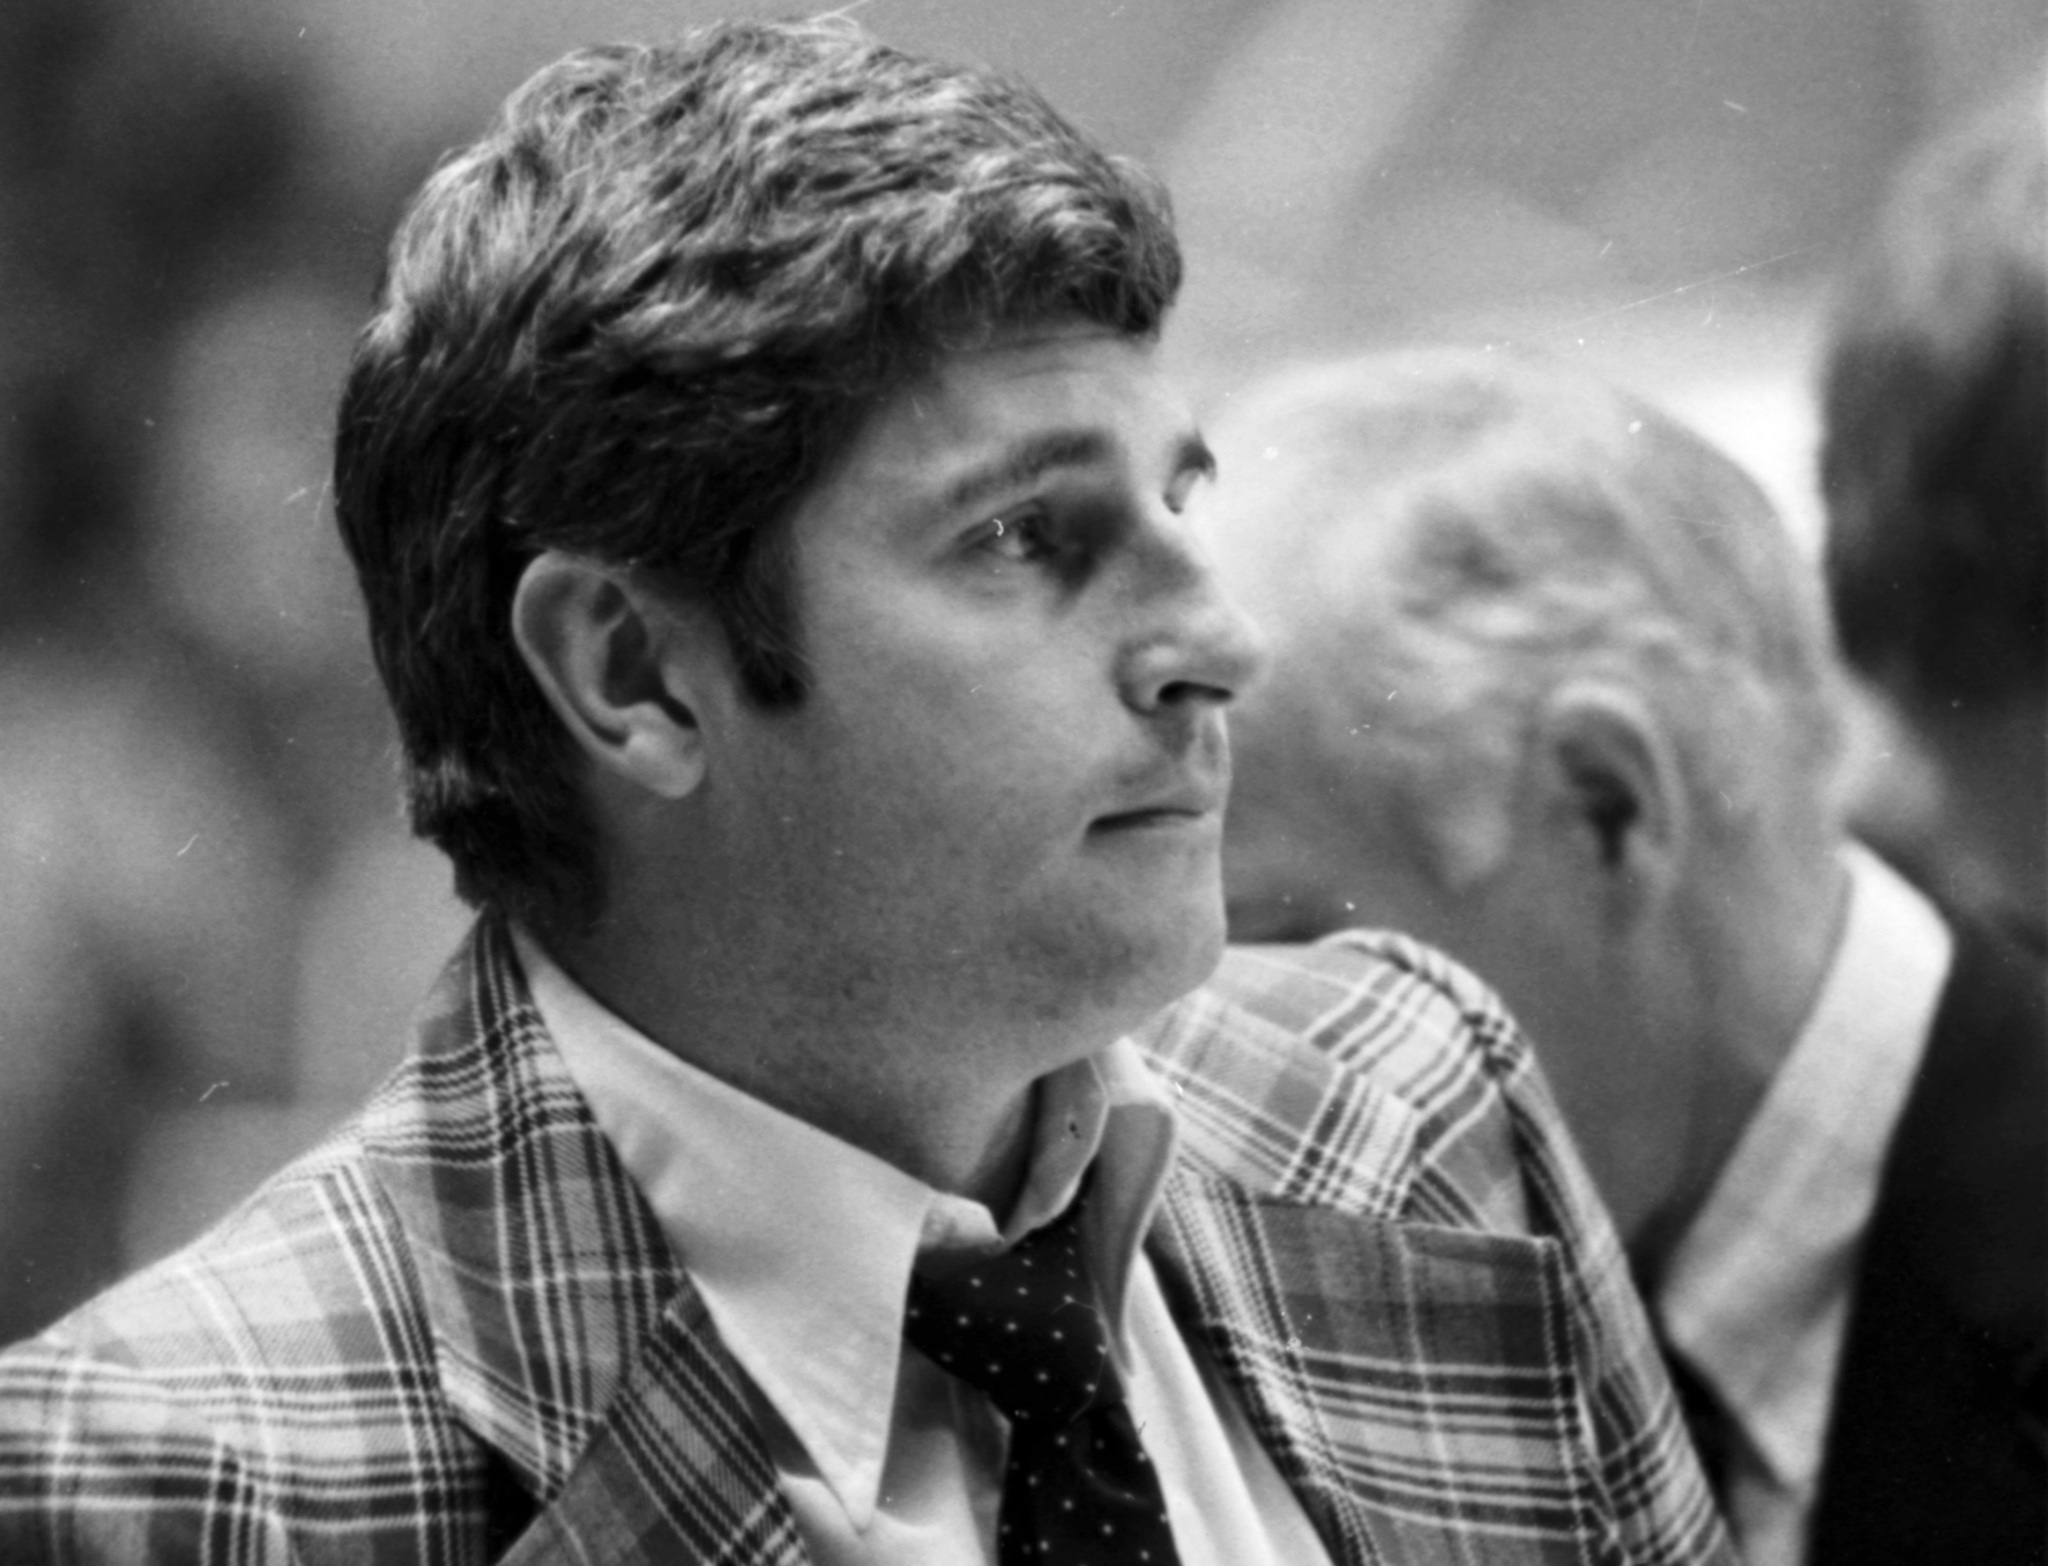 Bob Knight won national titles in 1976 and 1981 on either end of Mike Woodson's career, and he hated that Woodson left Indiana without a national title. (IU Archives)